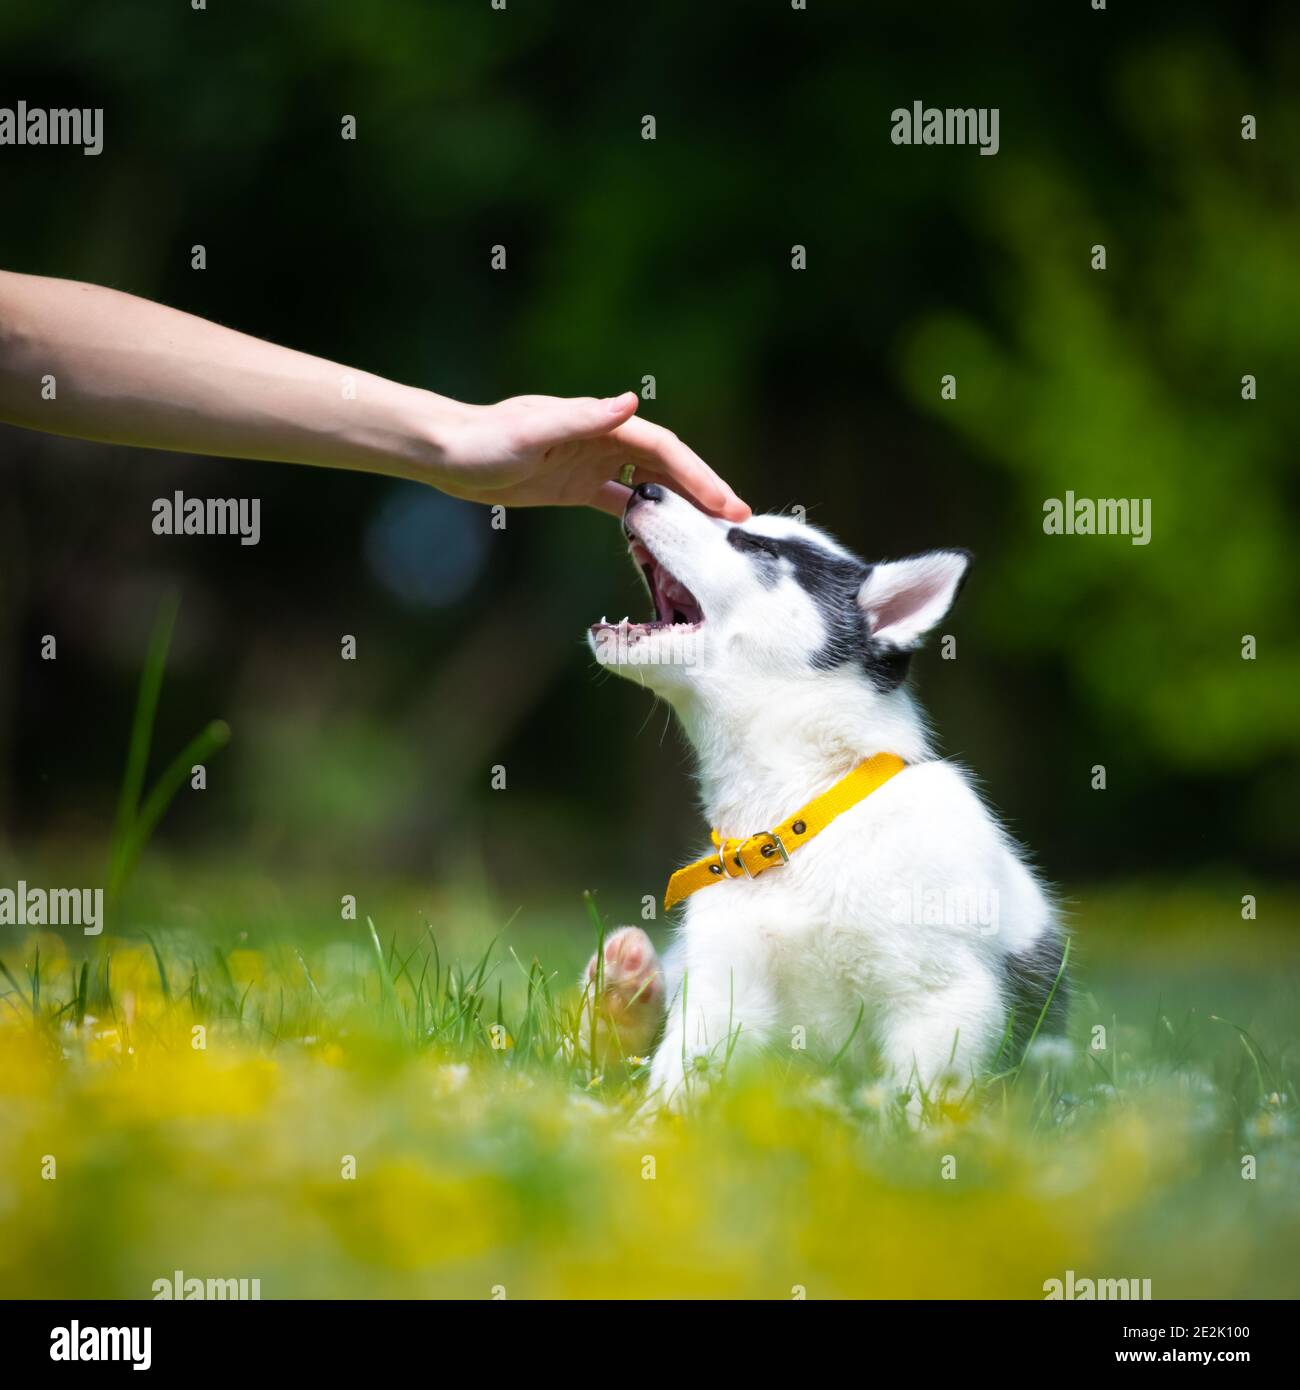 Hand with white dog puppy breed siberian husky on spring backyard. Dogs and pets photography Stock Photo